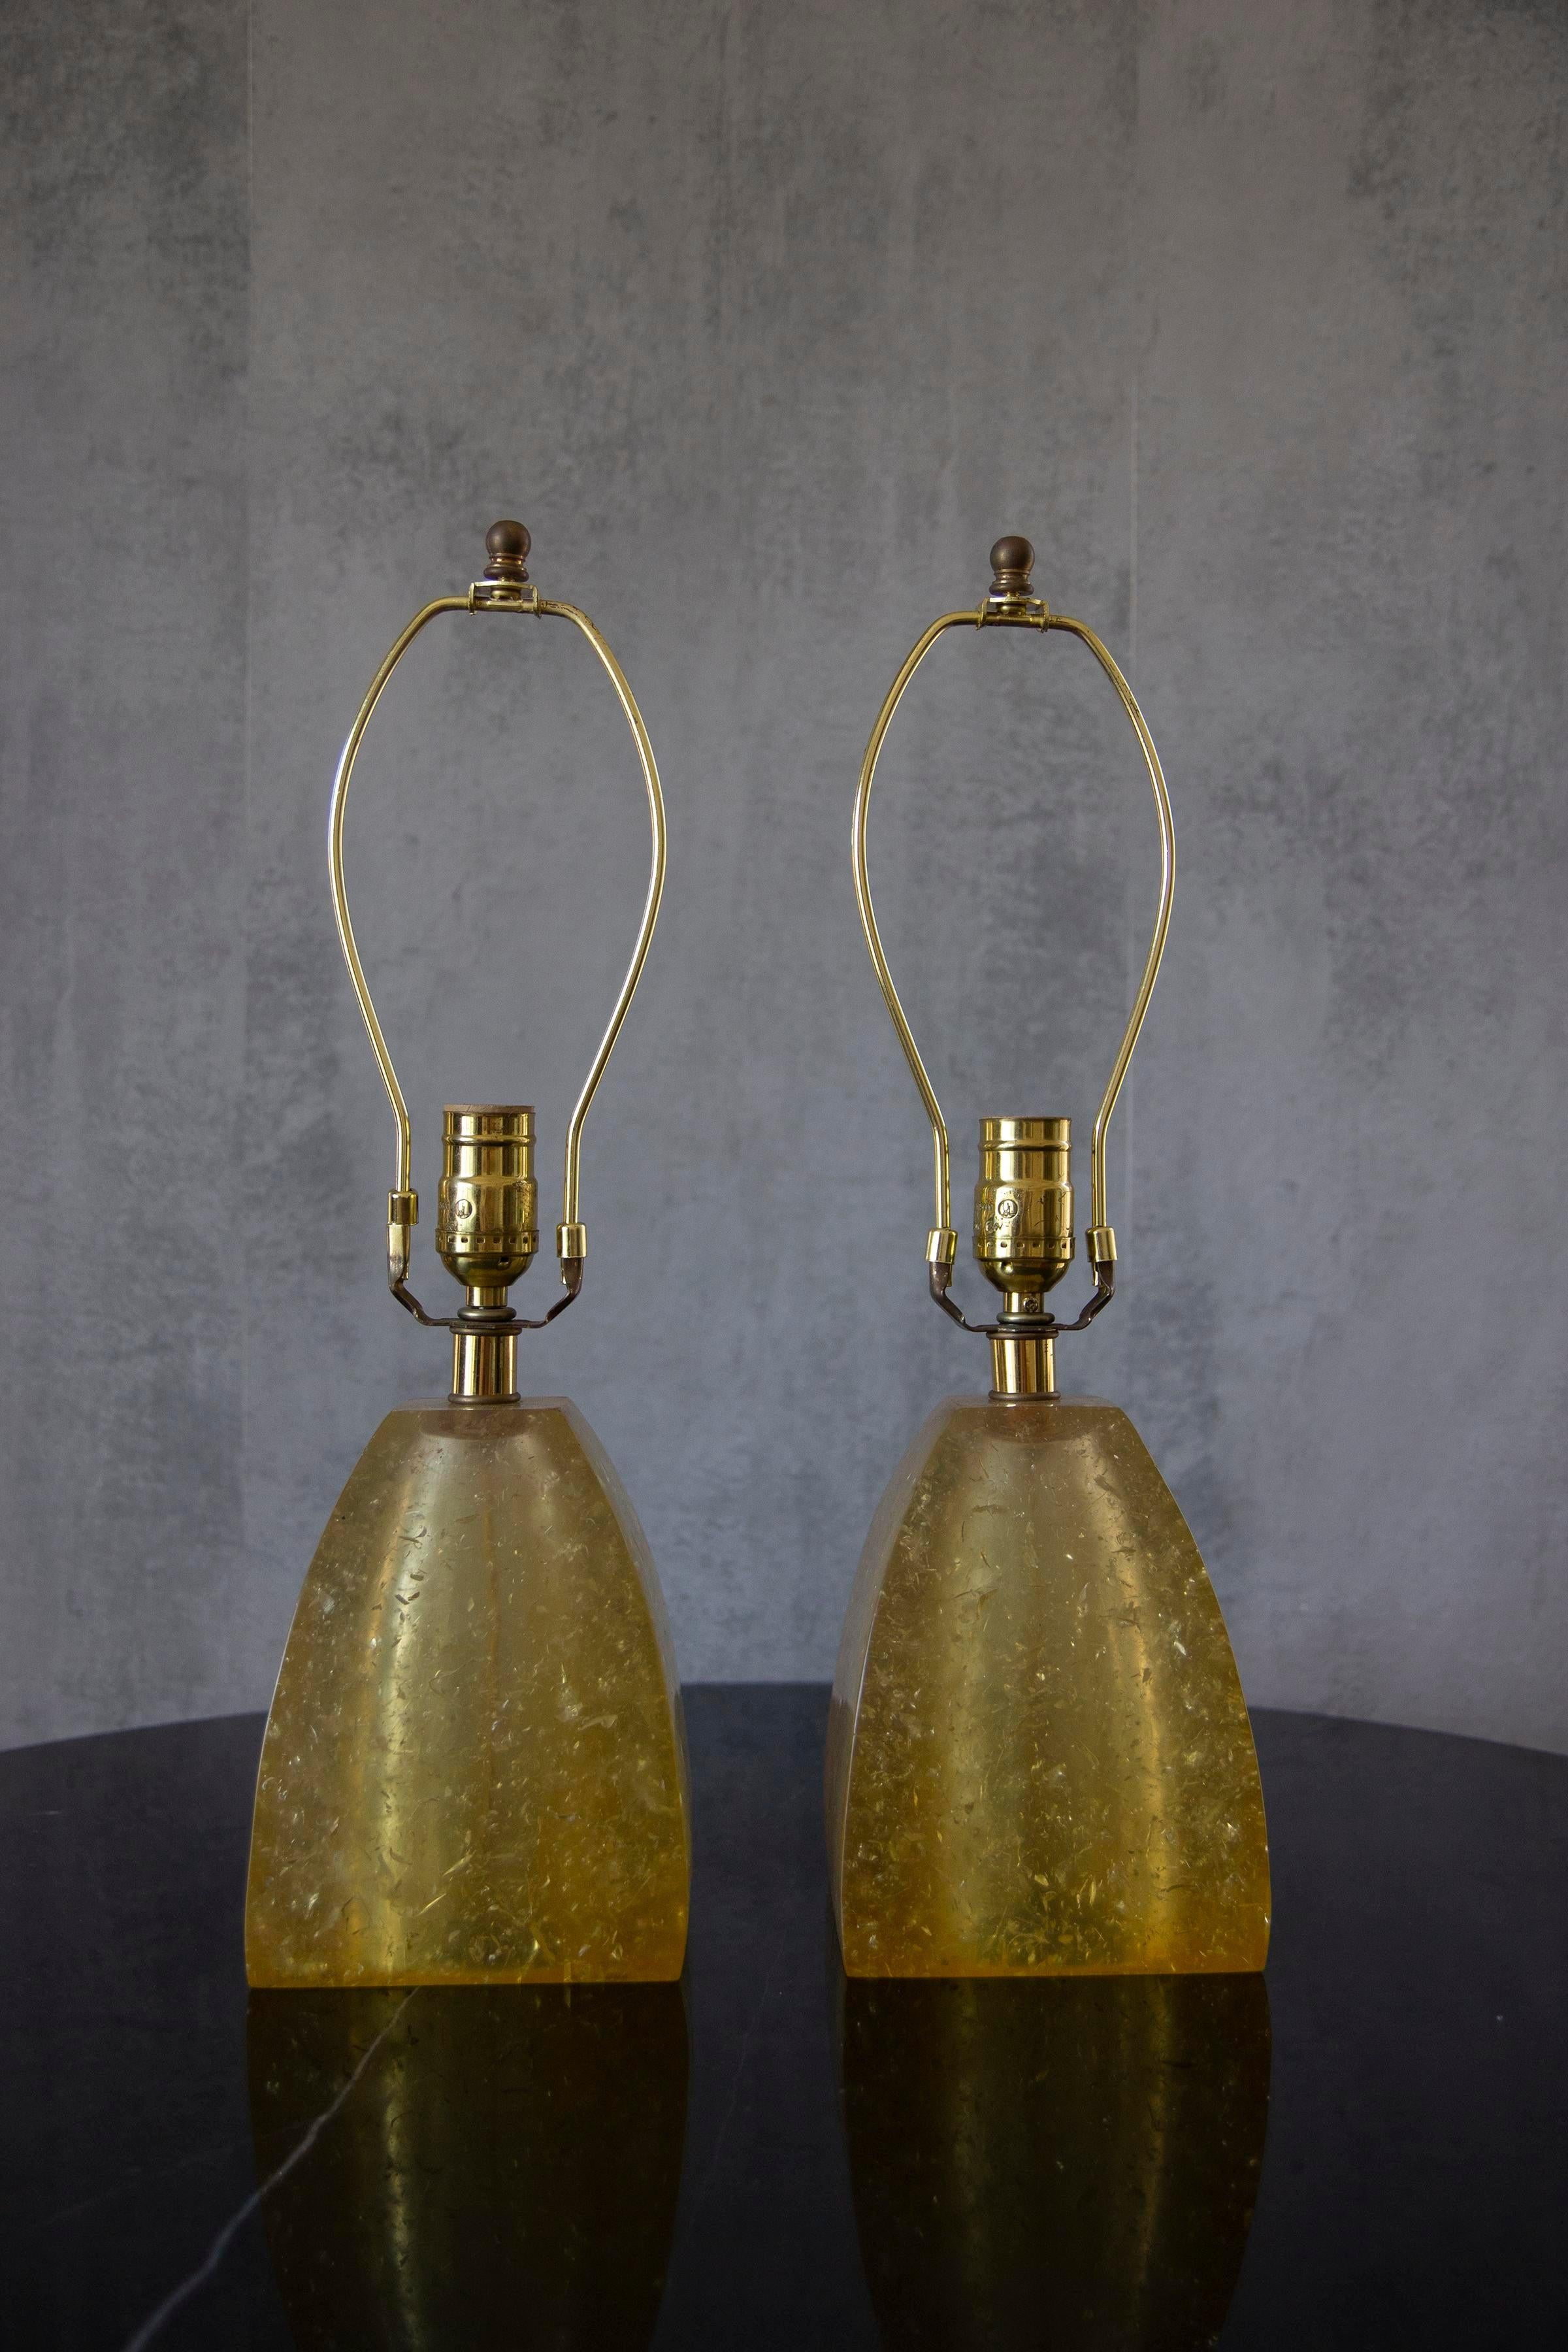 Rewired pair of golden Fractal resin Mantel lamps. 
Elegant and perfect to add some color to your living space.